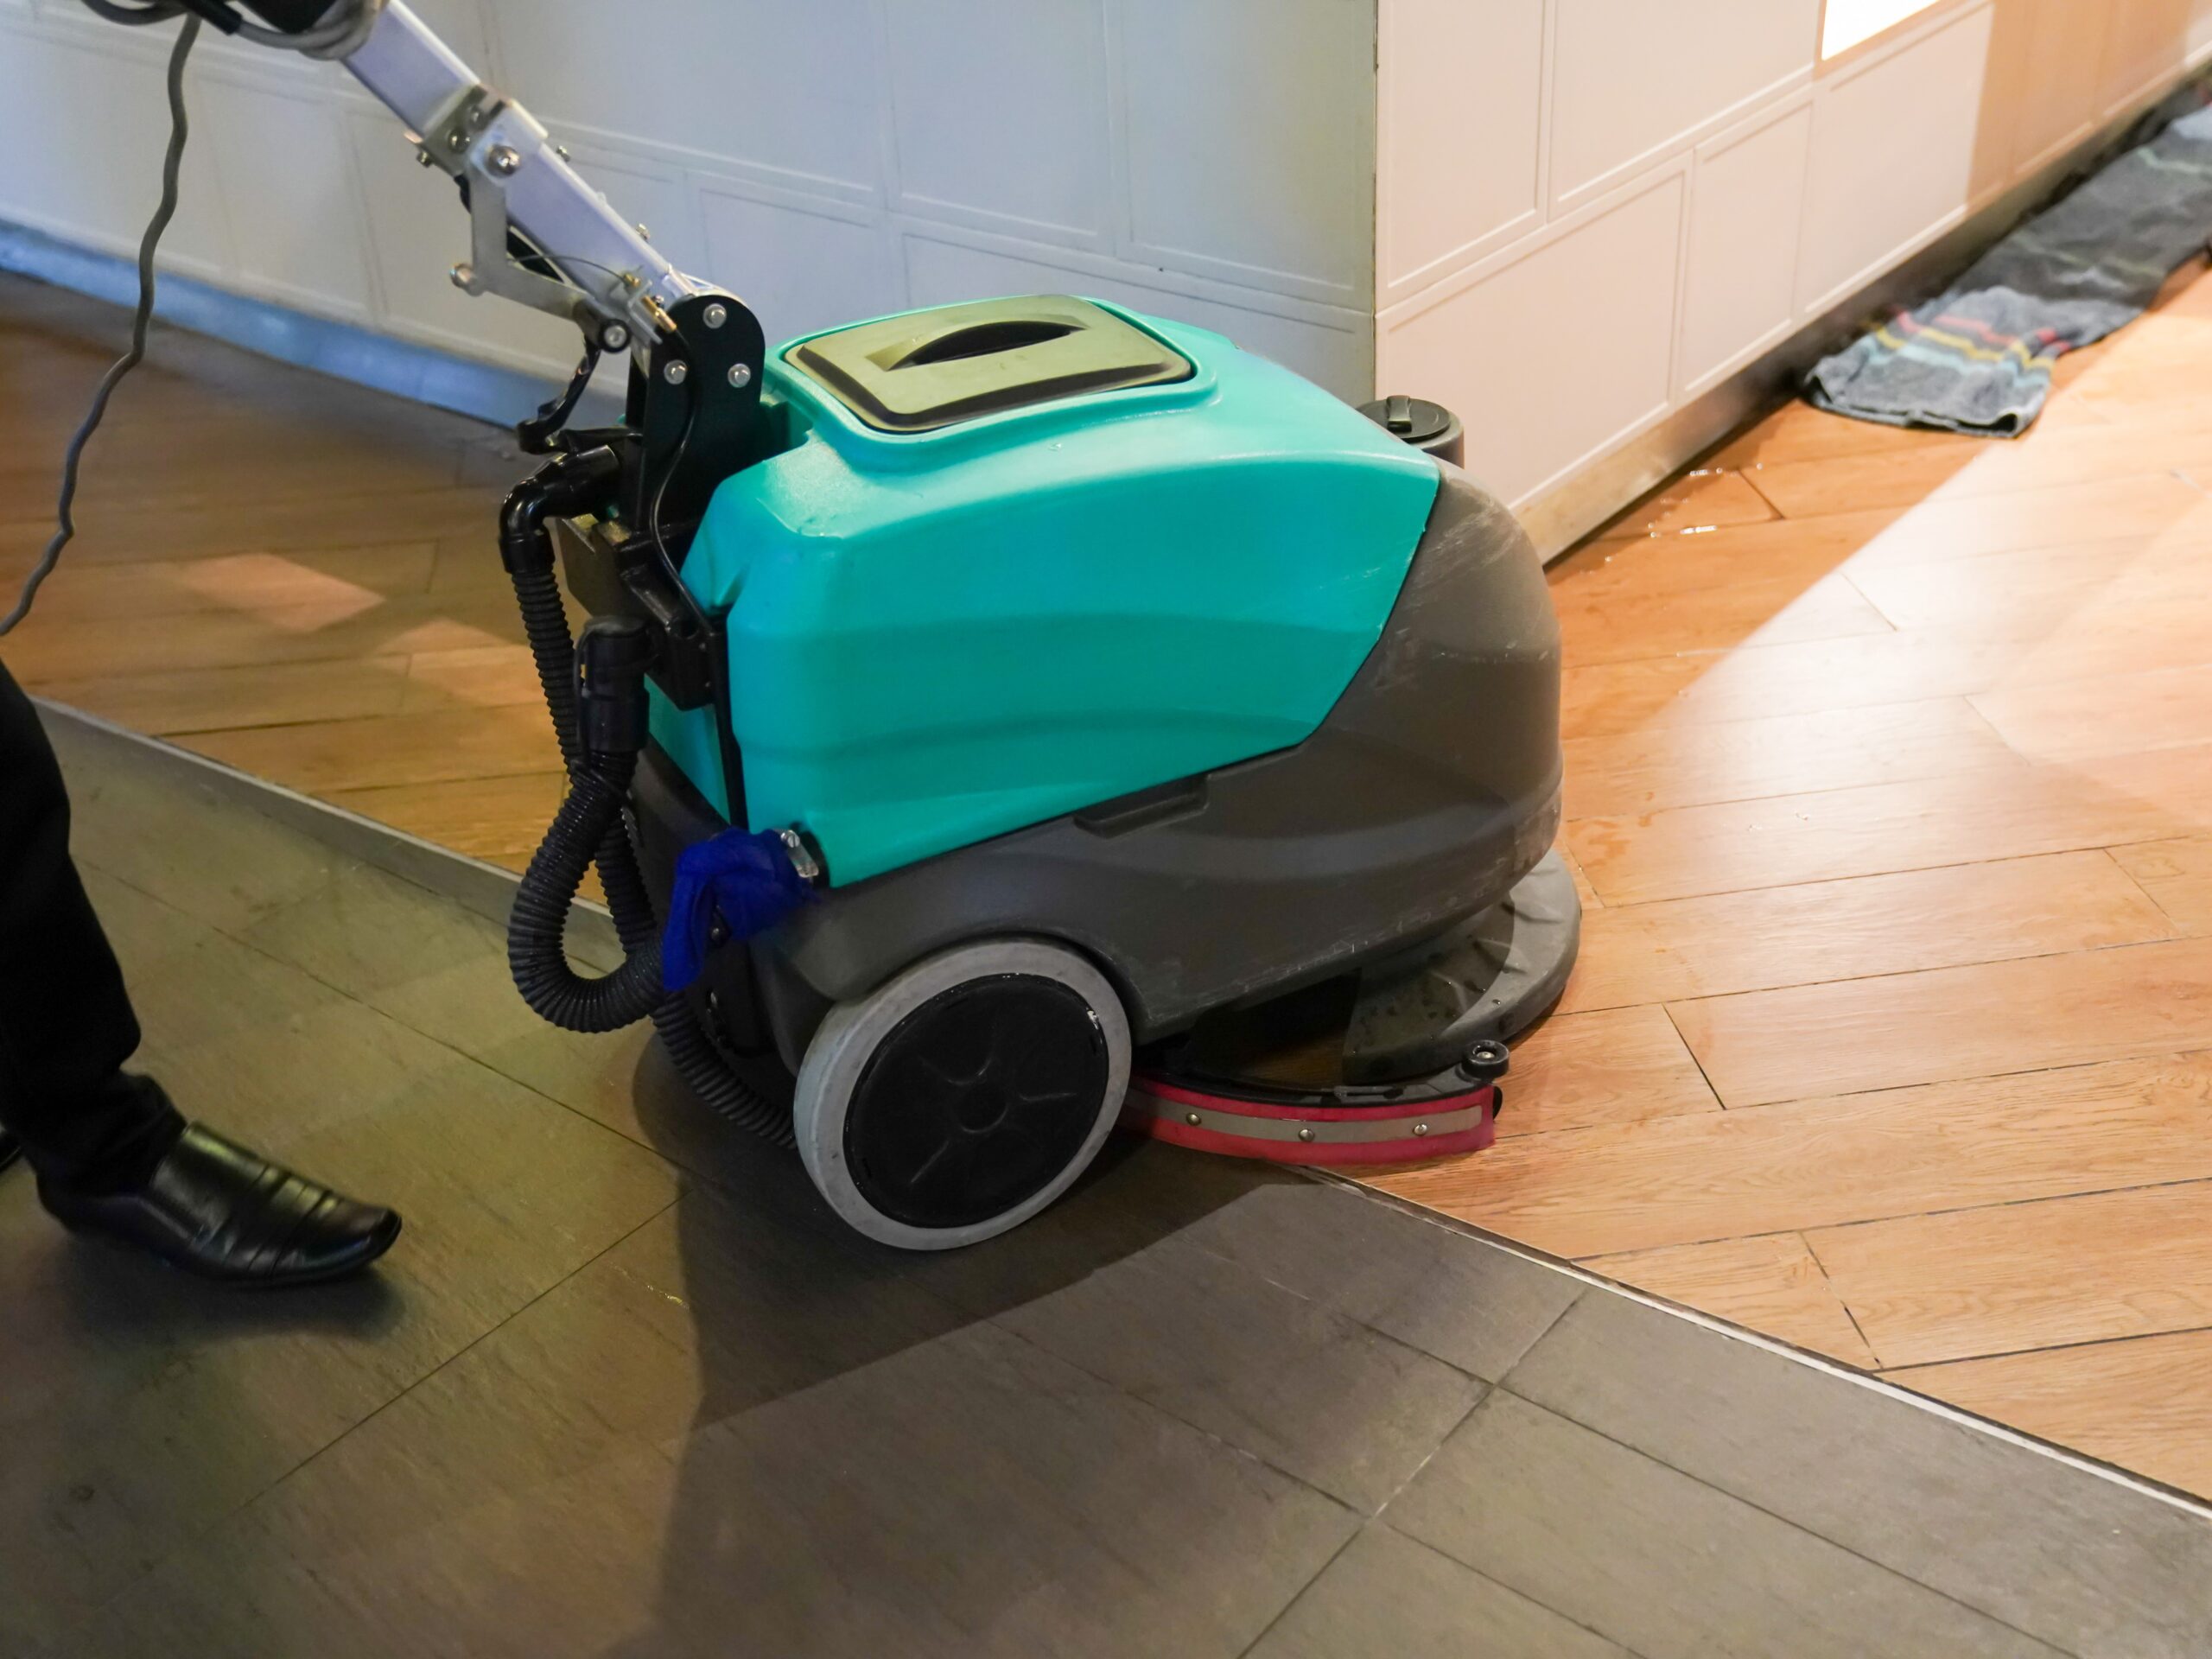 cleaning machine working on the floor.